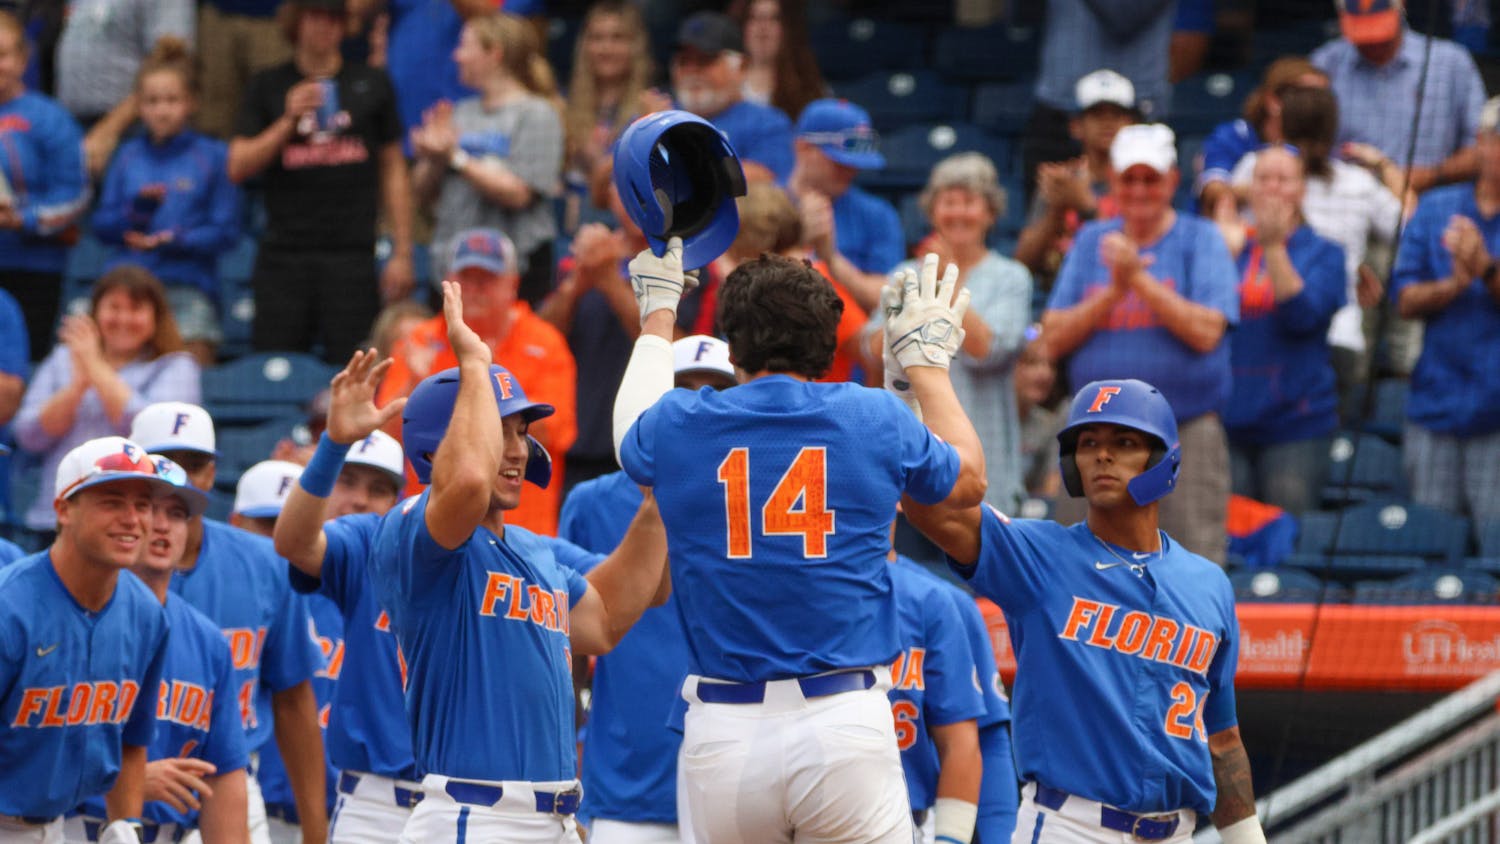 Florida two-way player Jac Caglianone walks to the dugout after a home run in the Gators' 14-6 loss to the Miami Hurricanes March 4, 2023.